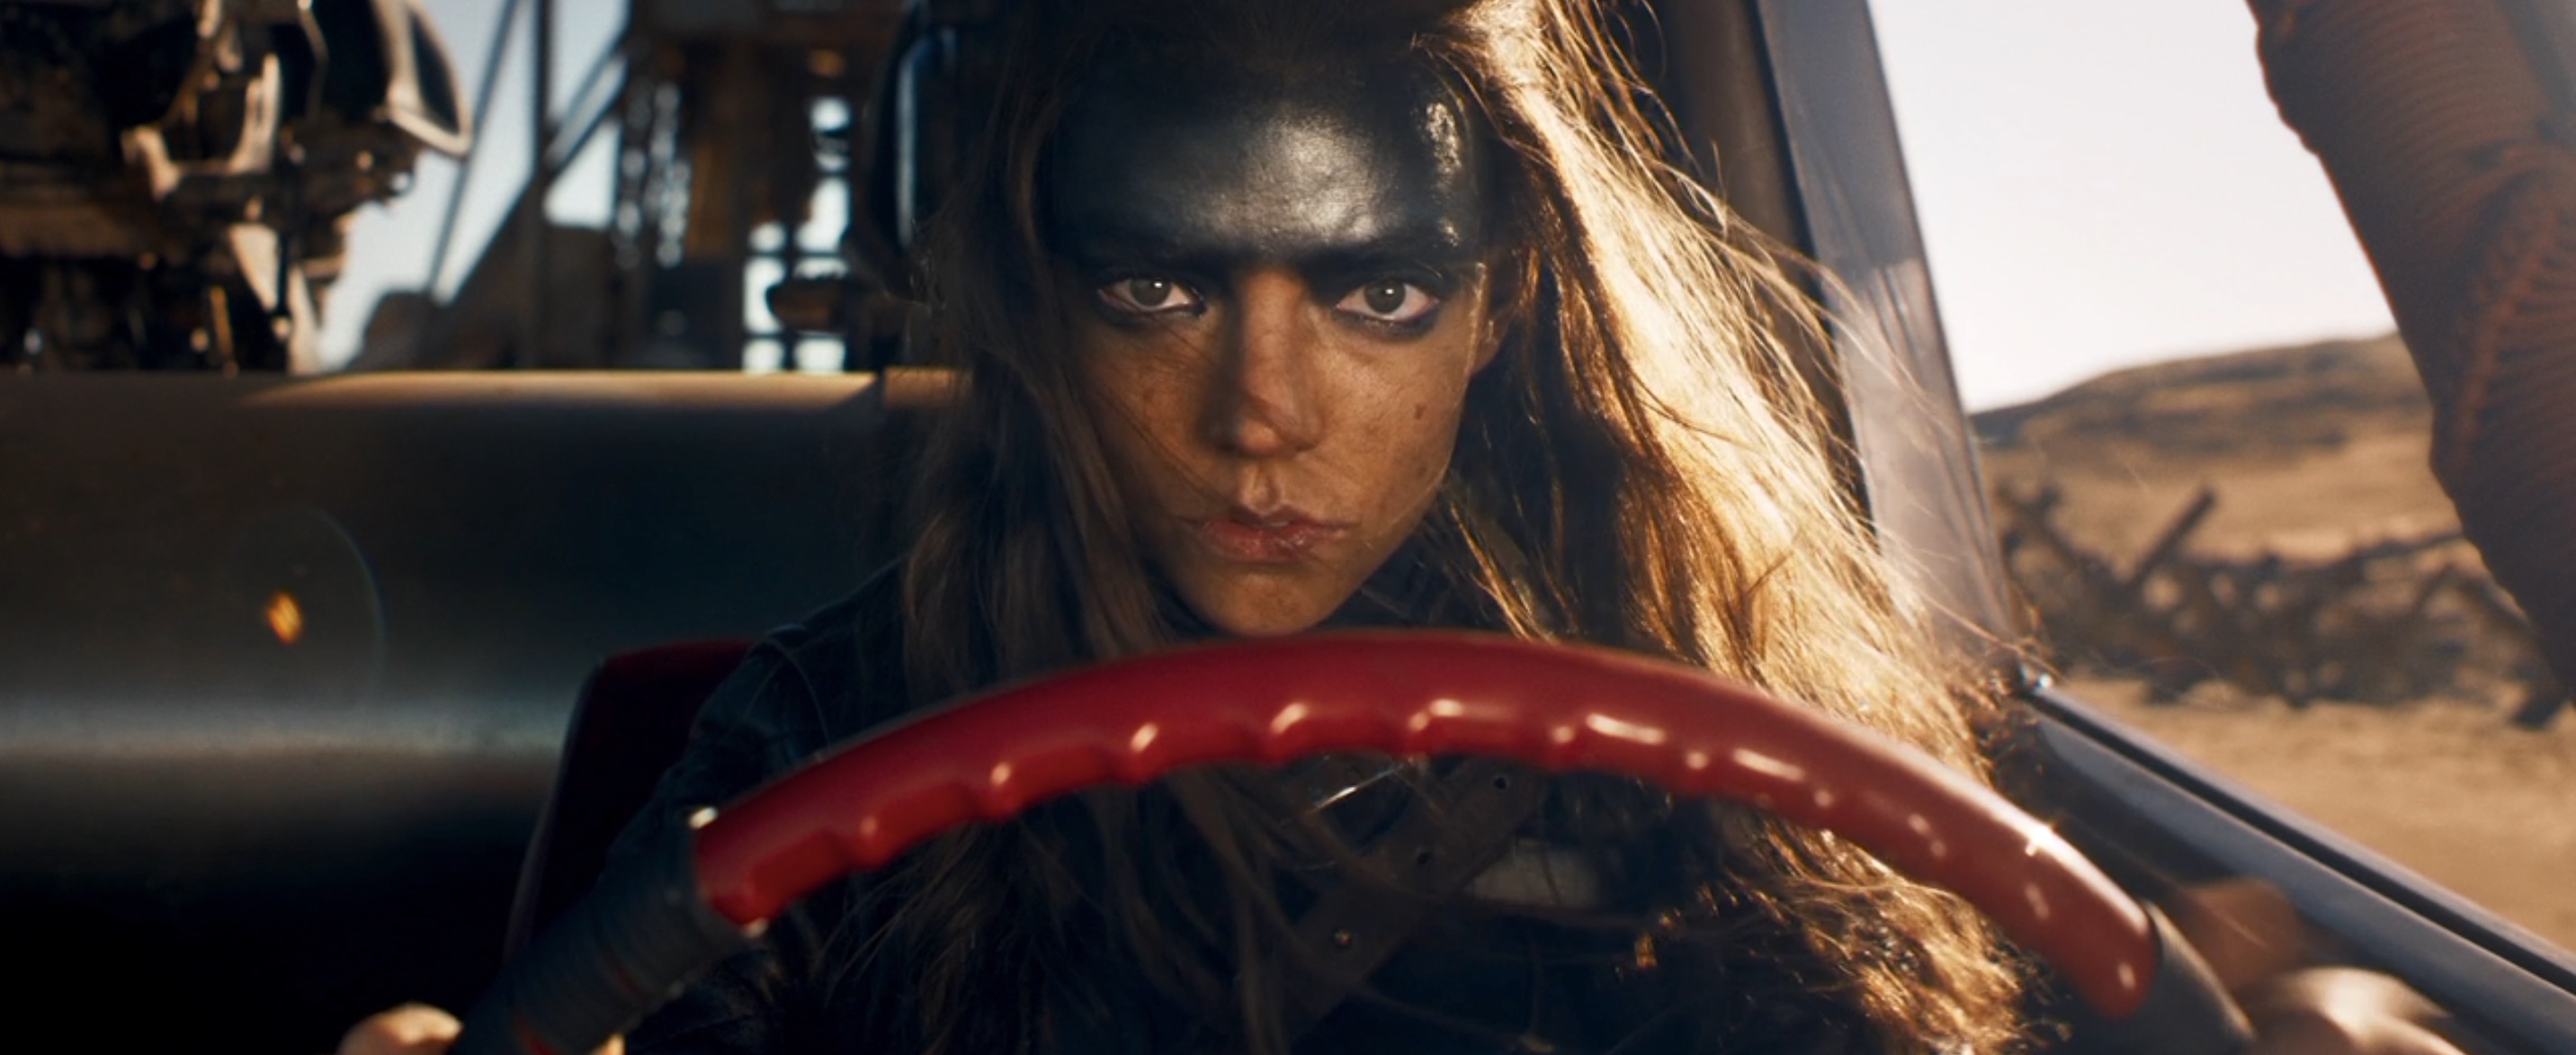 Furiosa (Anya Taylor-Joy), forehead smeared with greasepaint, drives the war rig in George Miller’s Furiosa